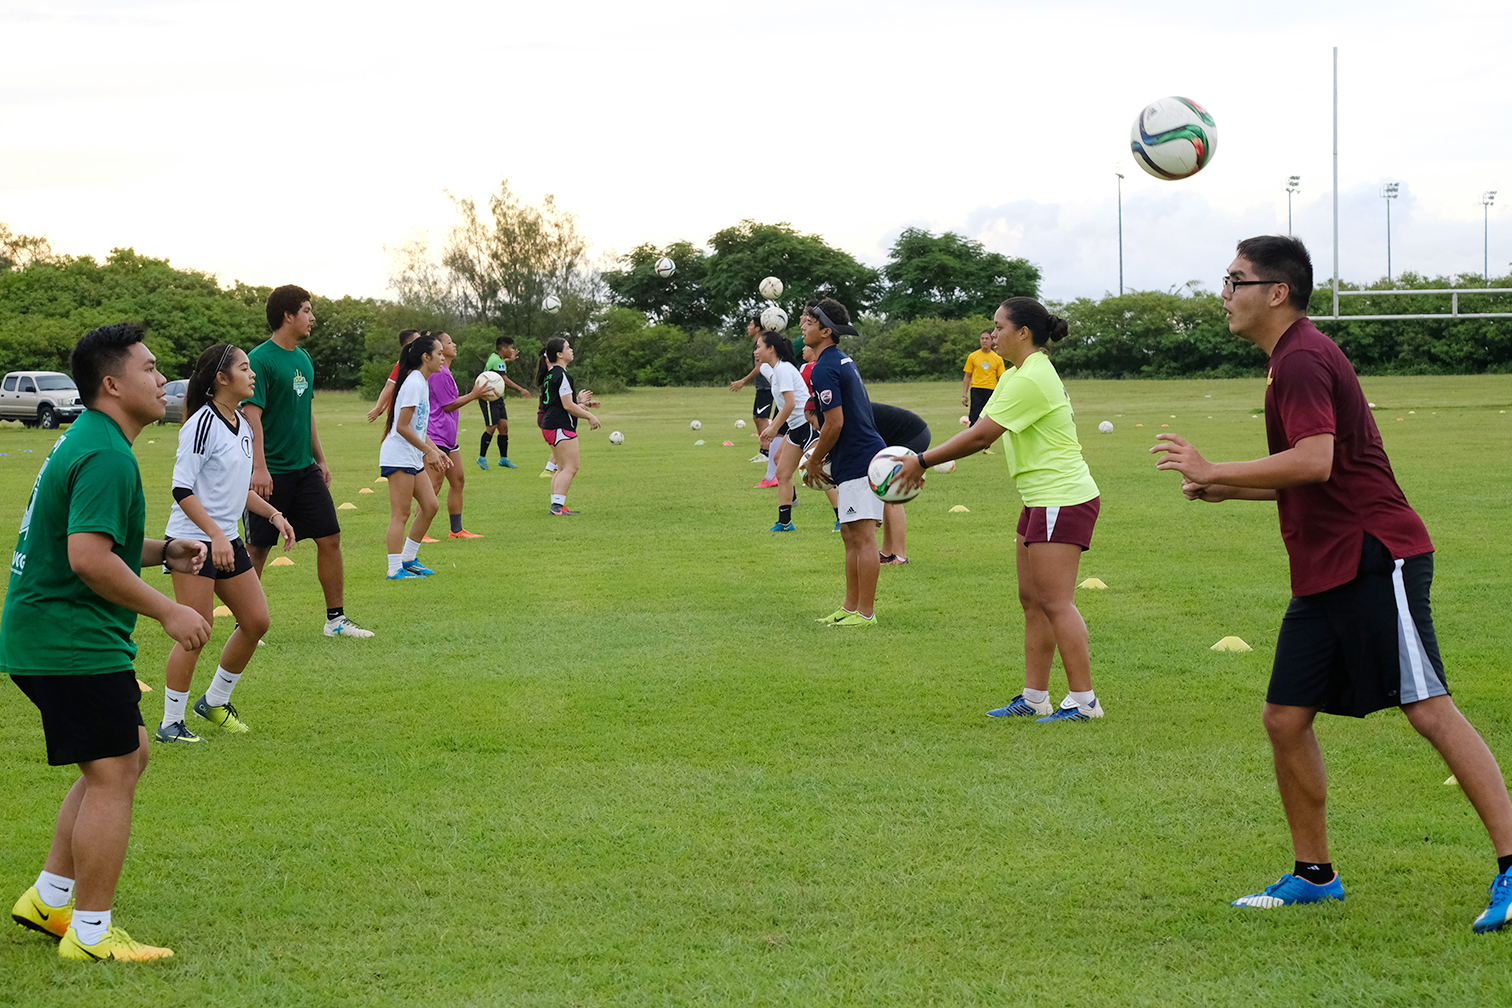 Photos - Coach Hidalgo working with team & players learning skills - Photos by UOG Sports Photographer, Victor Consaga